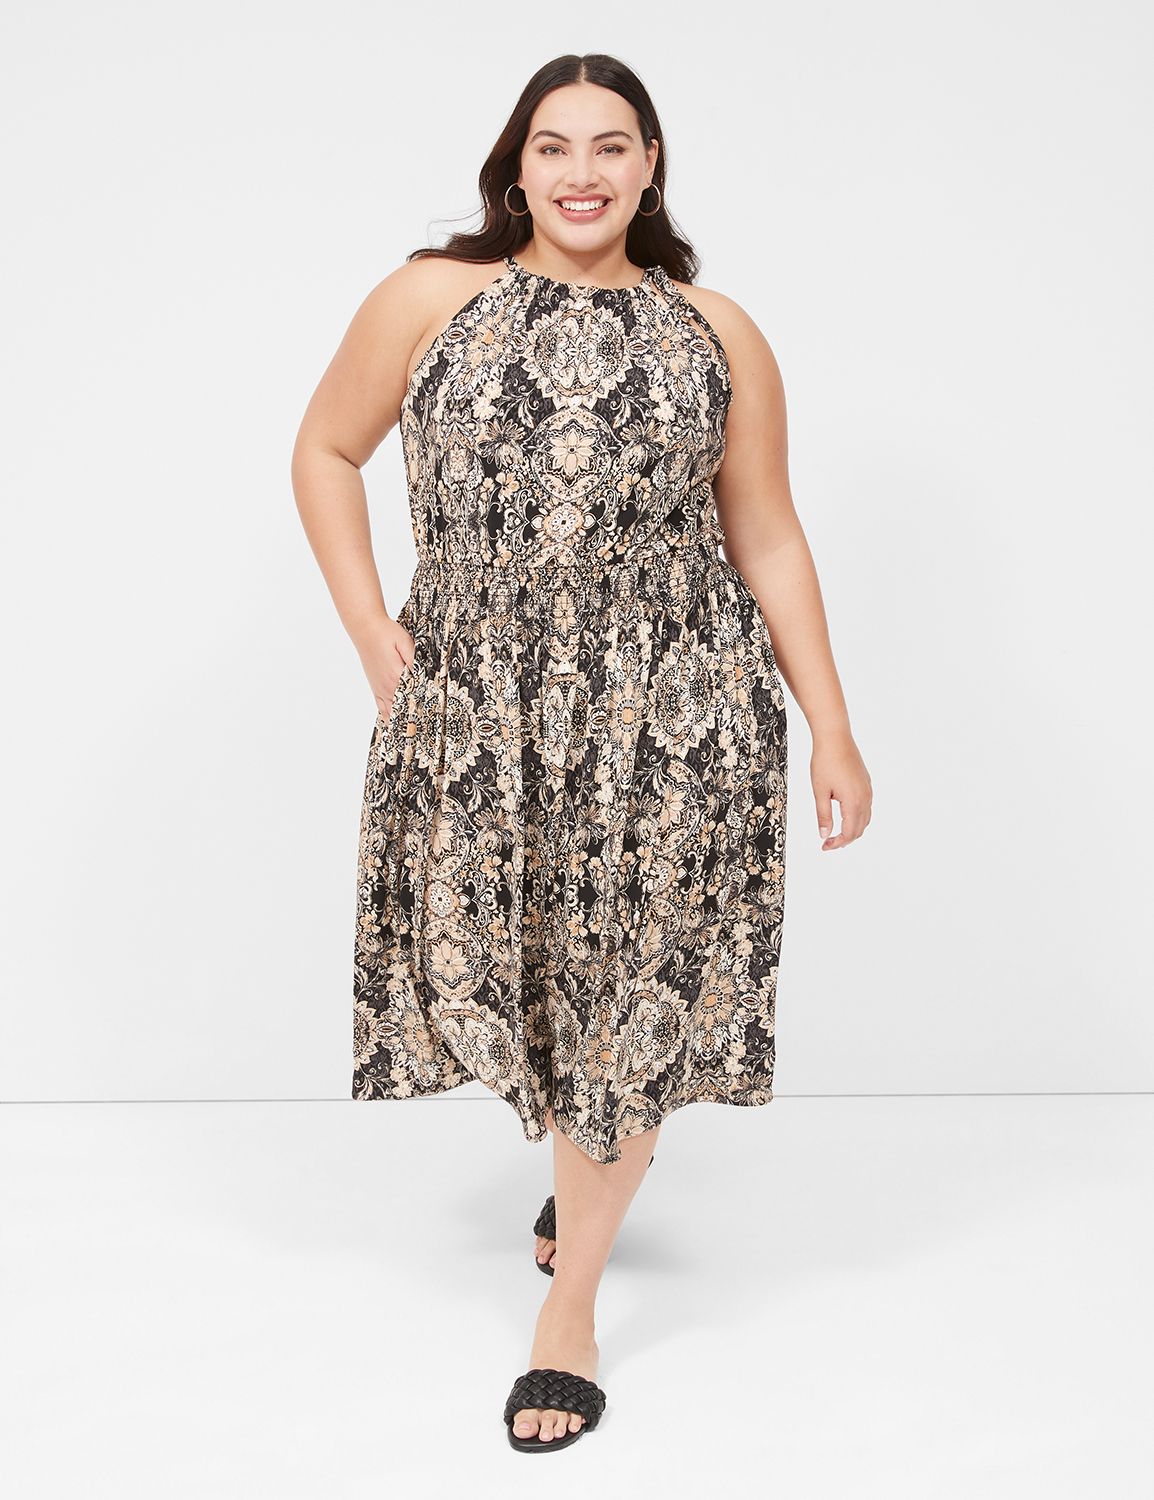 Fashionable Dresses For Plus Size Women  Casual plus size outfits, Plus size  outfits, Plus size fashion